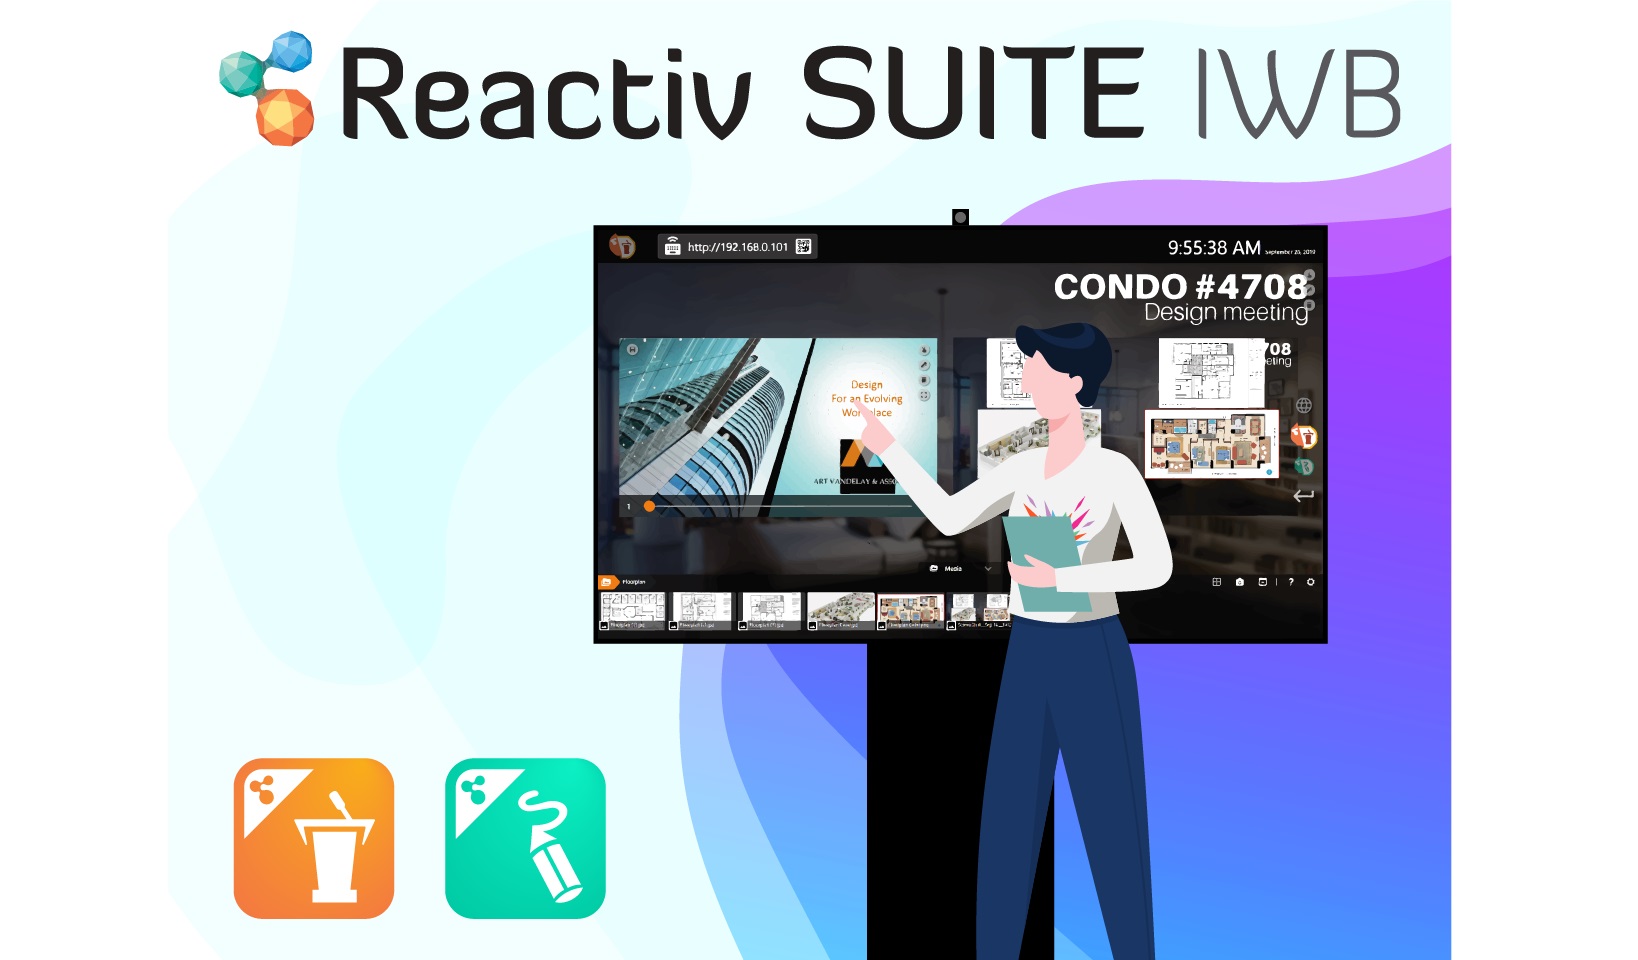 Get feedback from a vast remote working audience about Reactiv Suite